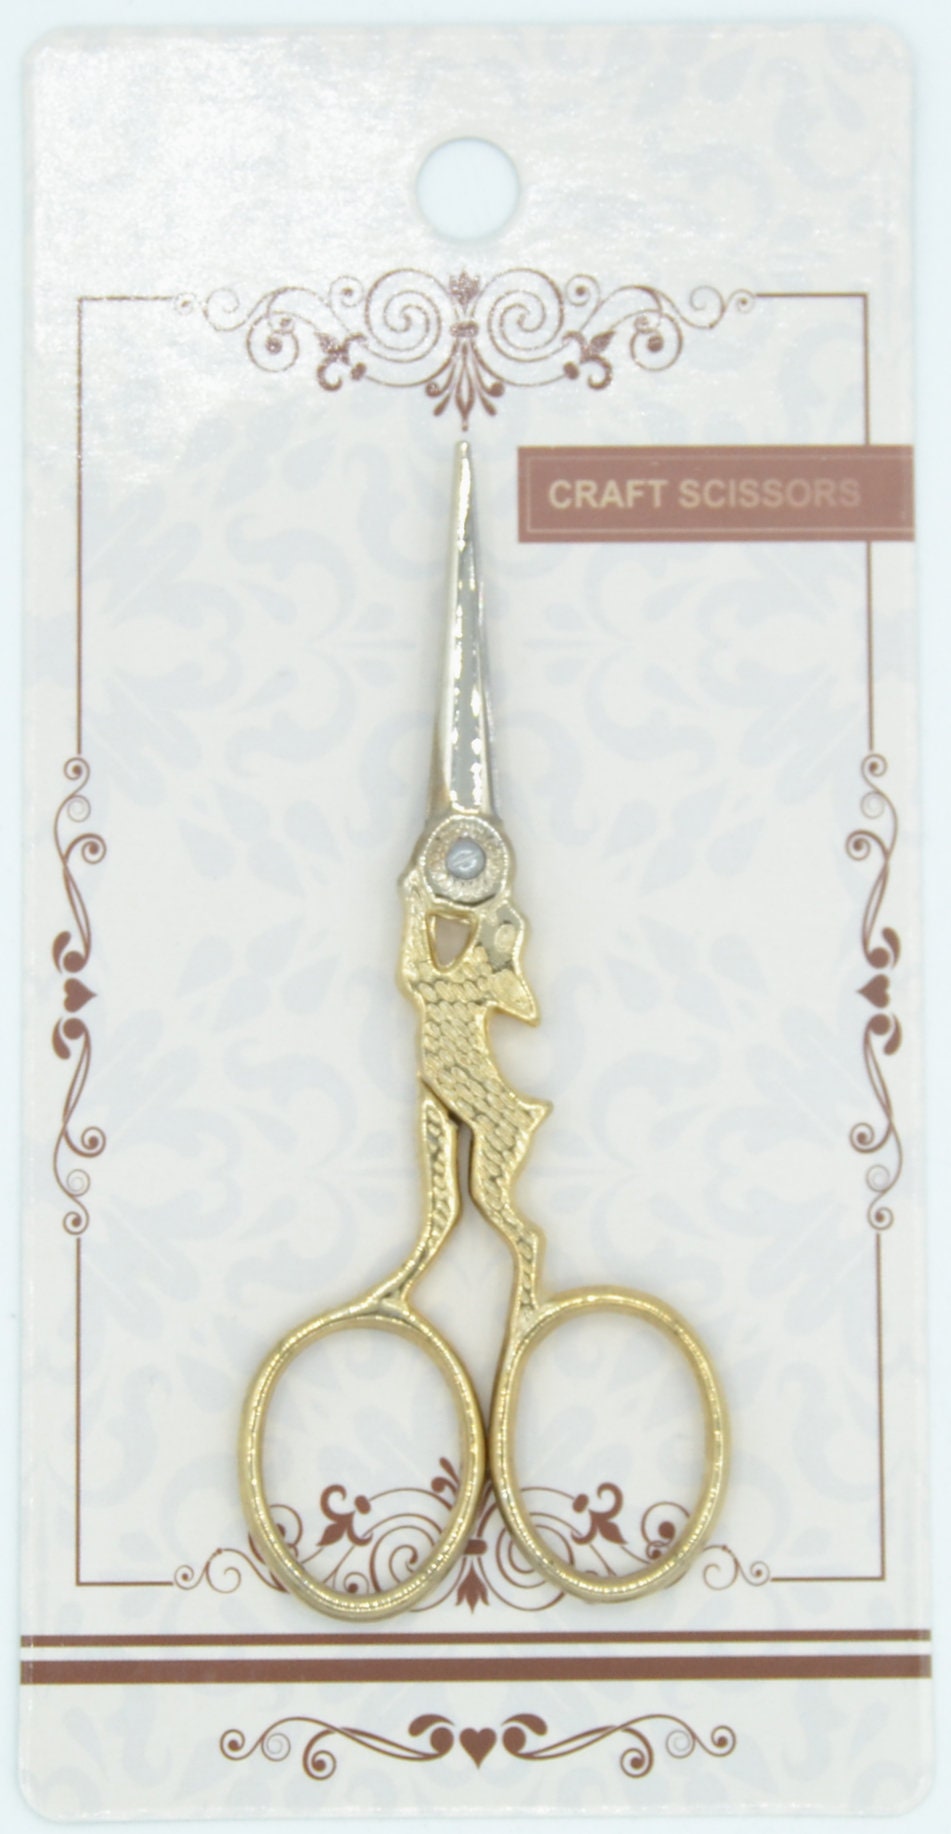 Fugacal Mini Scissors,Embroidery Scissors Stainless Steel Small Hand‑Made  Sewing Shears for Paper Cutting Arts Crafts Projects,Fabric Scissors 